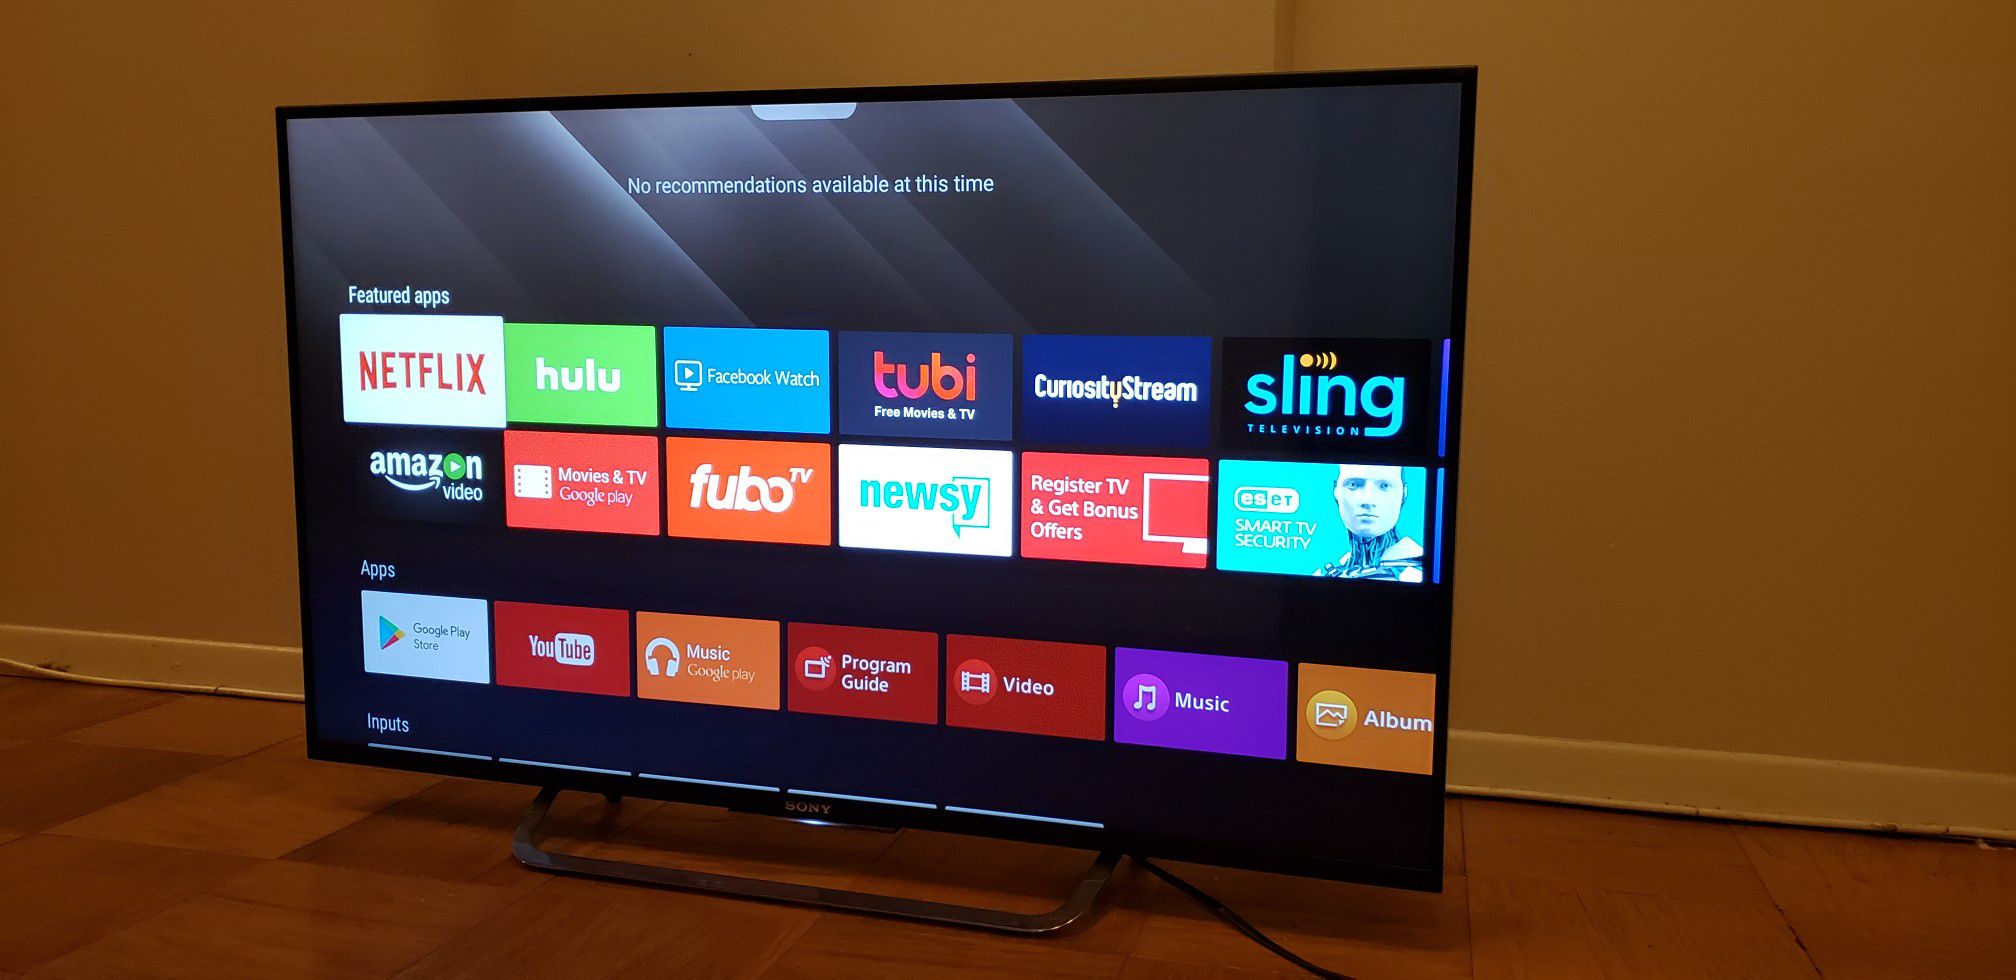 43" Sony 4K Android Smart TV